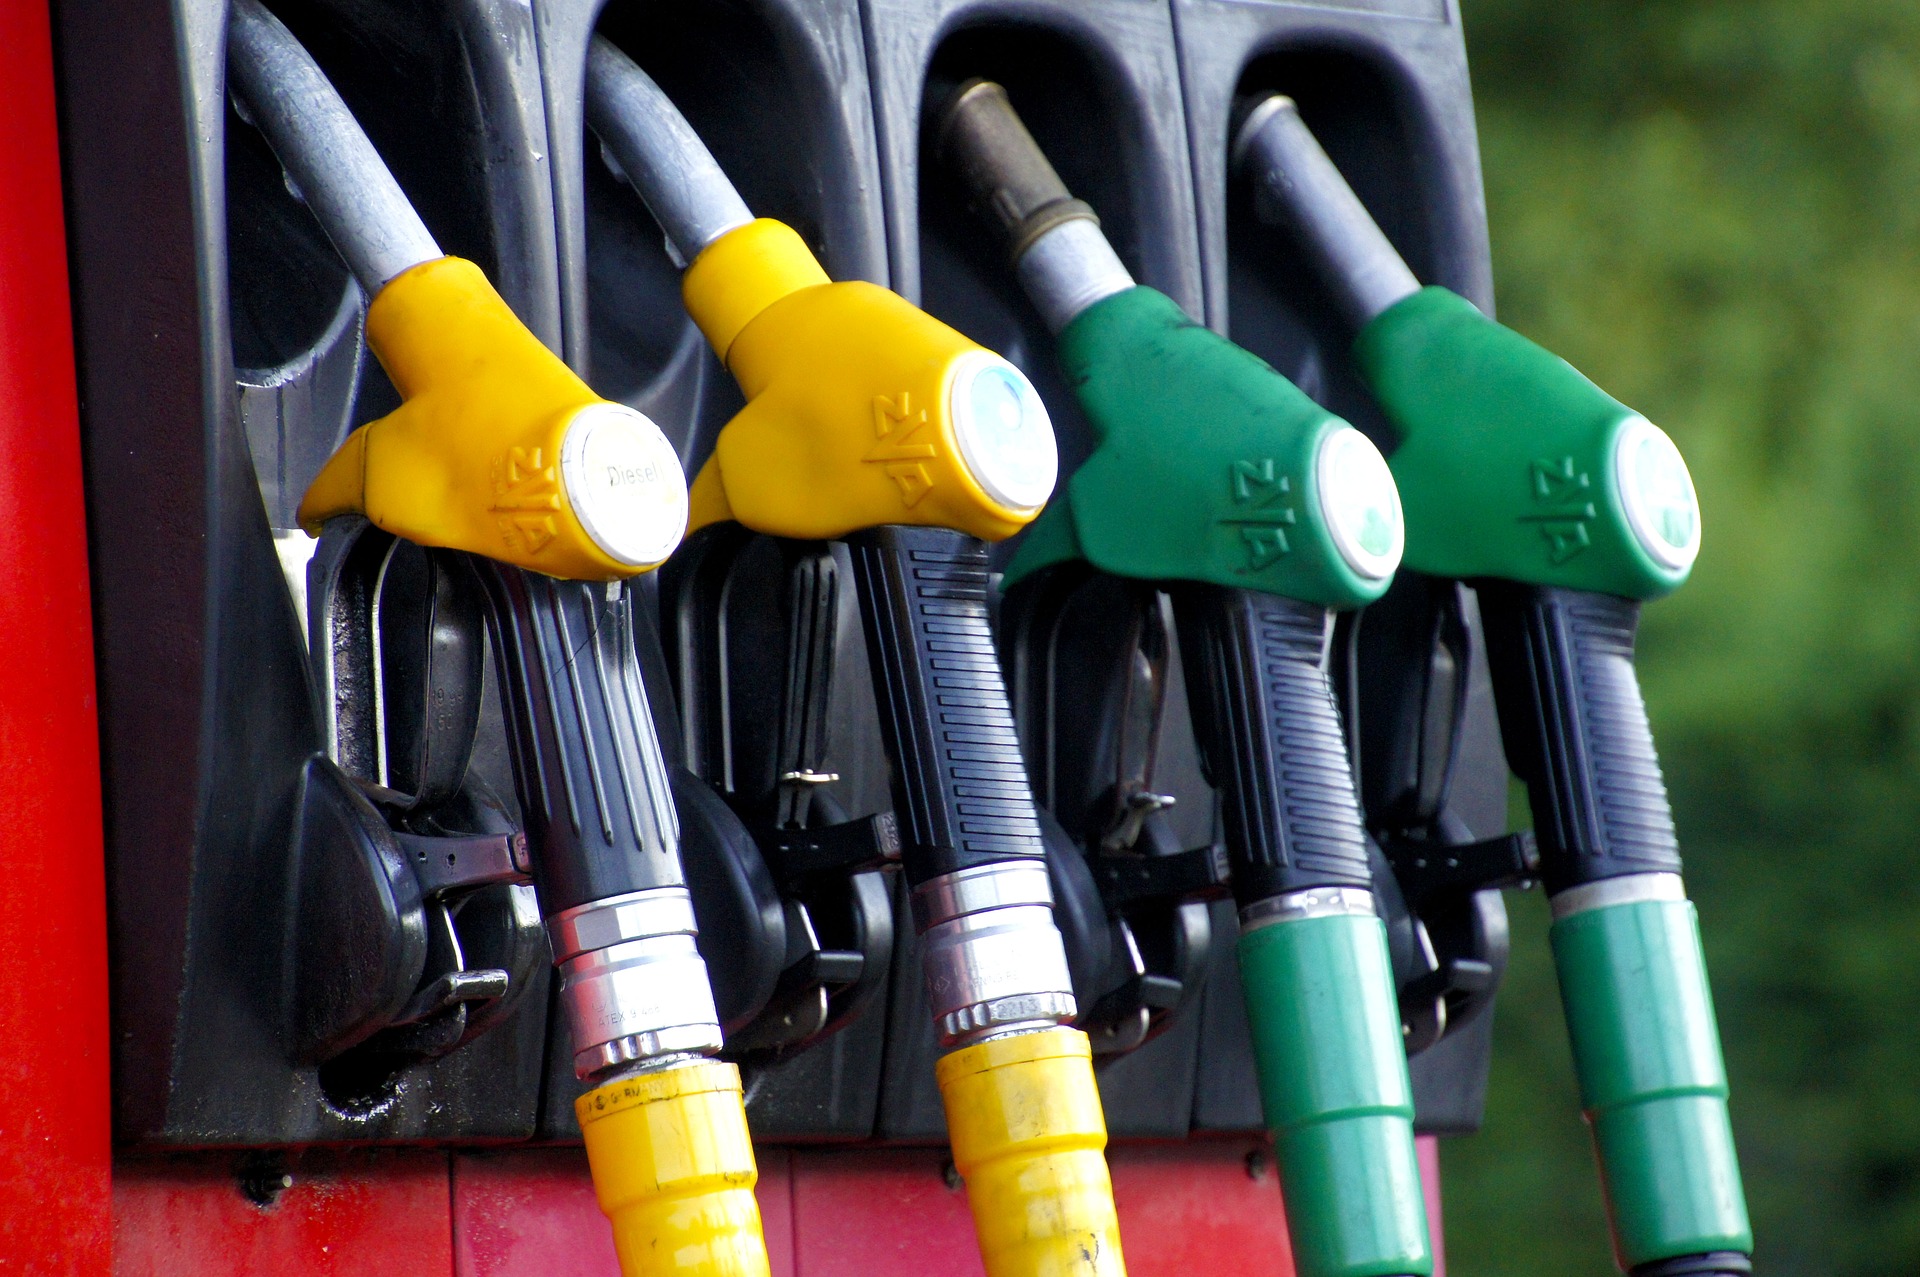 Another fuel price hike in February  